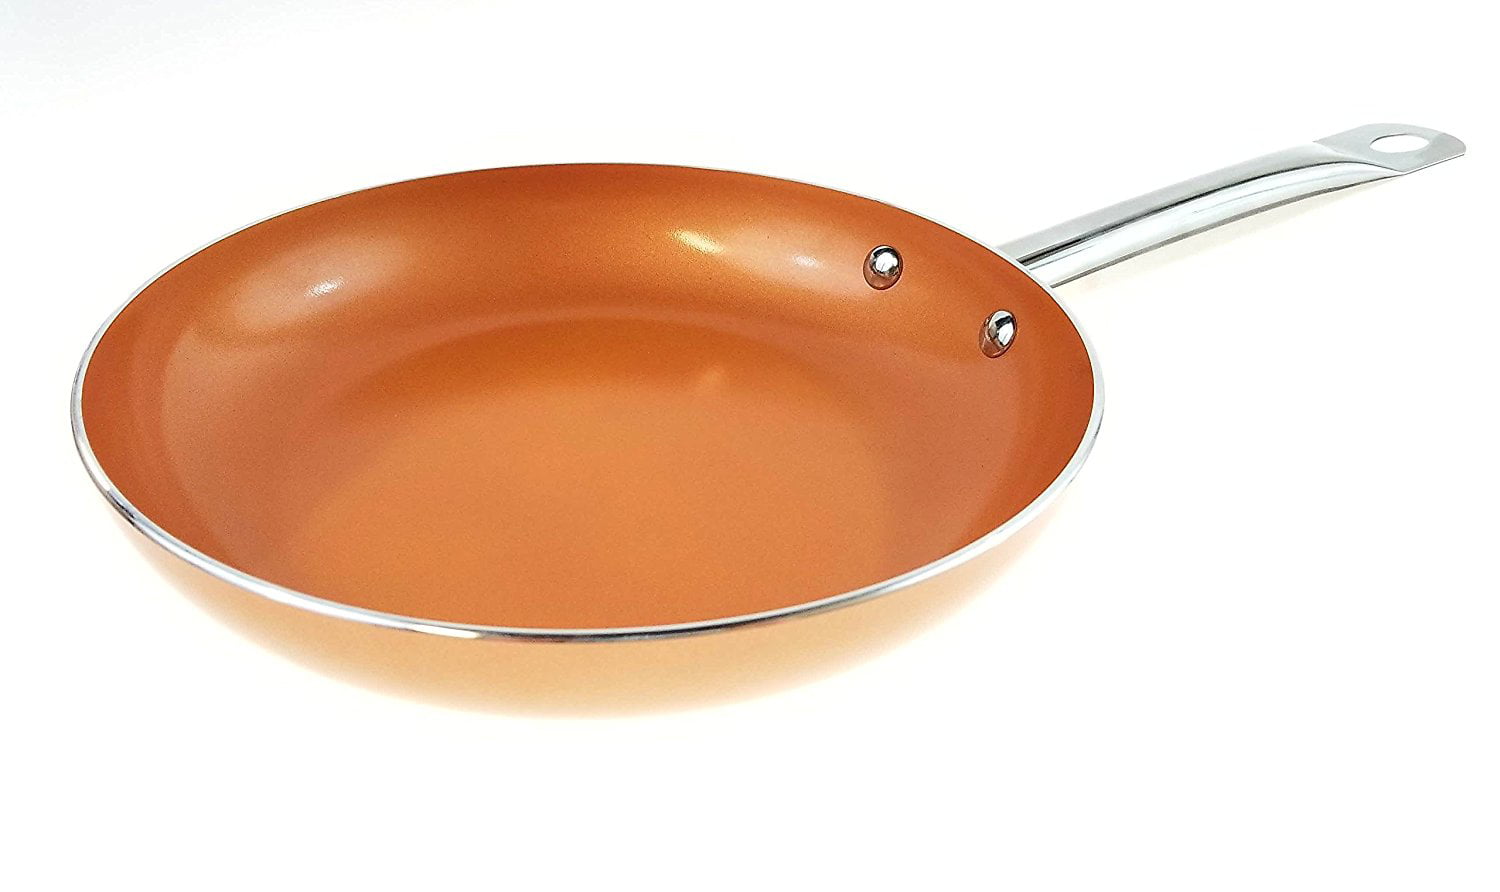 Diamond Home Chefs Cuisine 11 Inches Copper Frying Pan Ceramic Coated